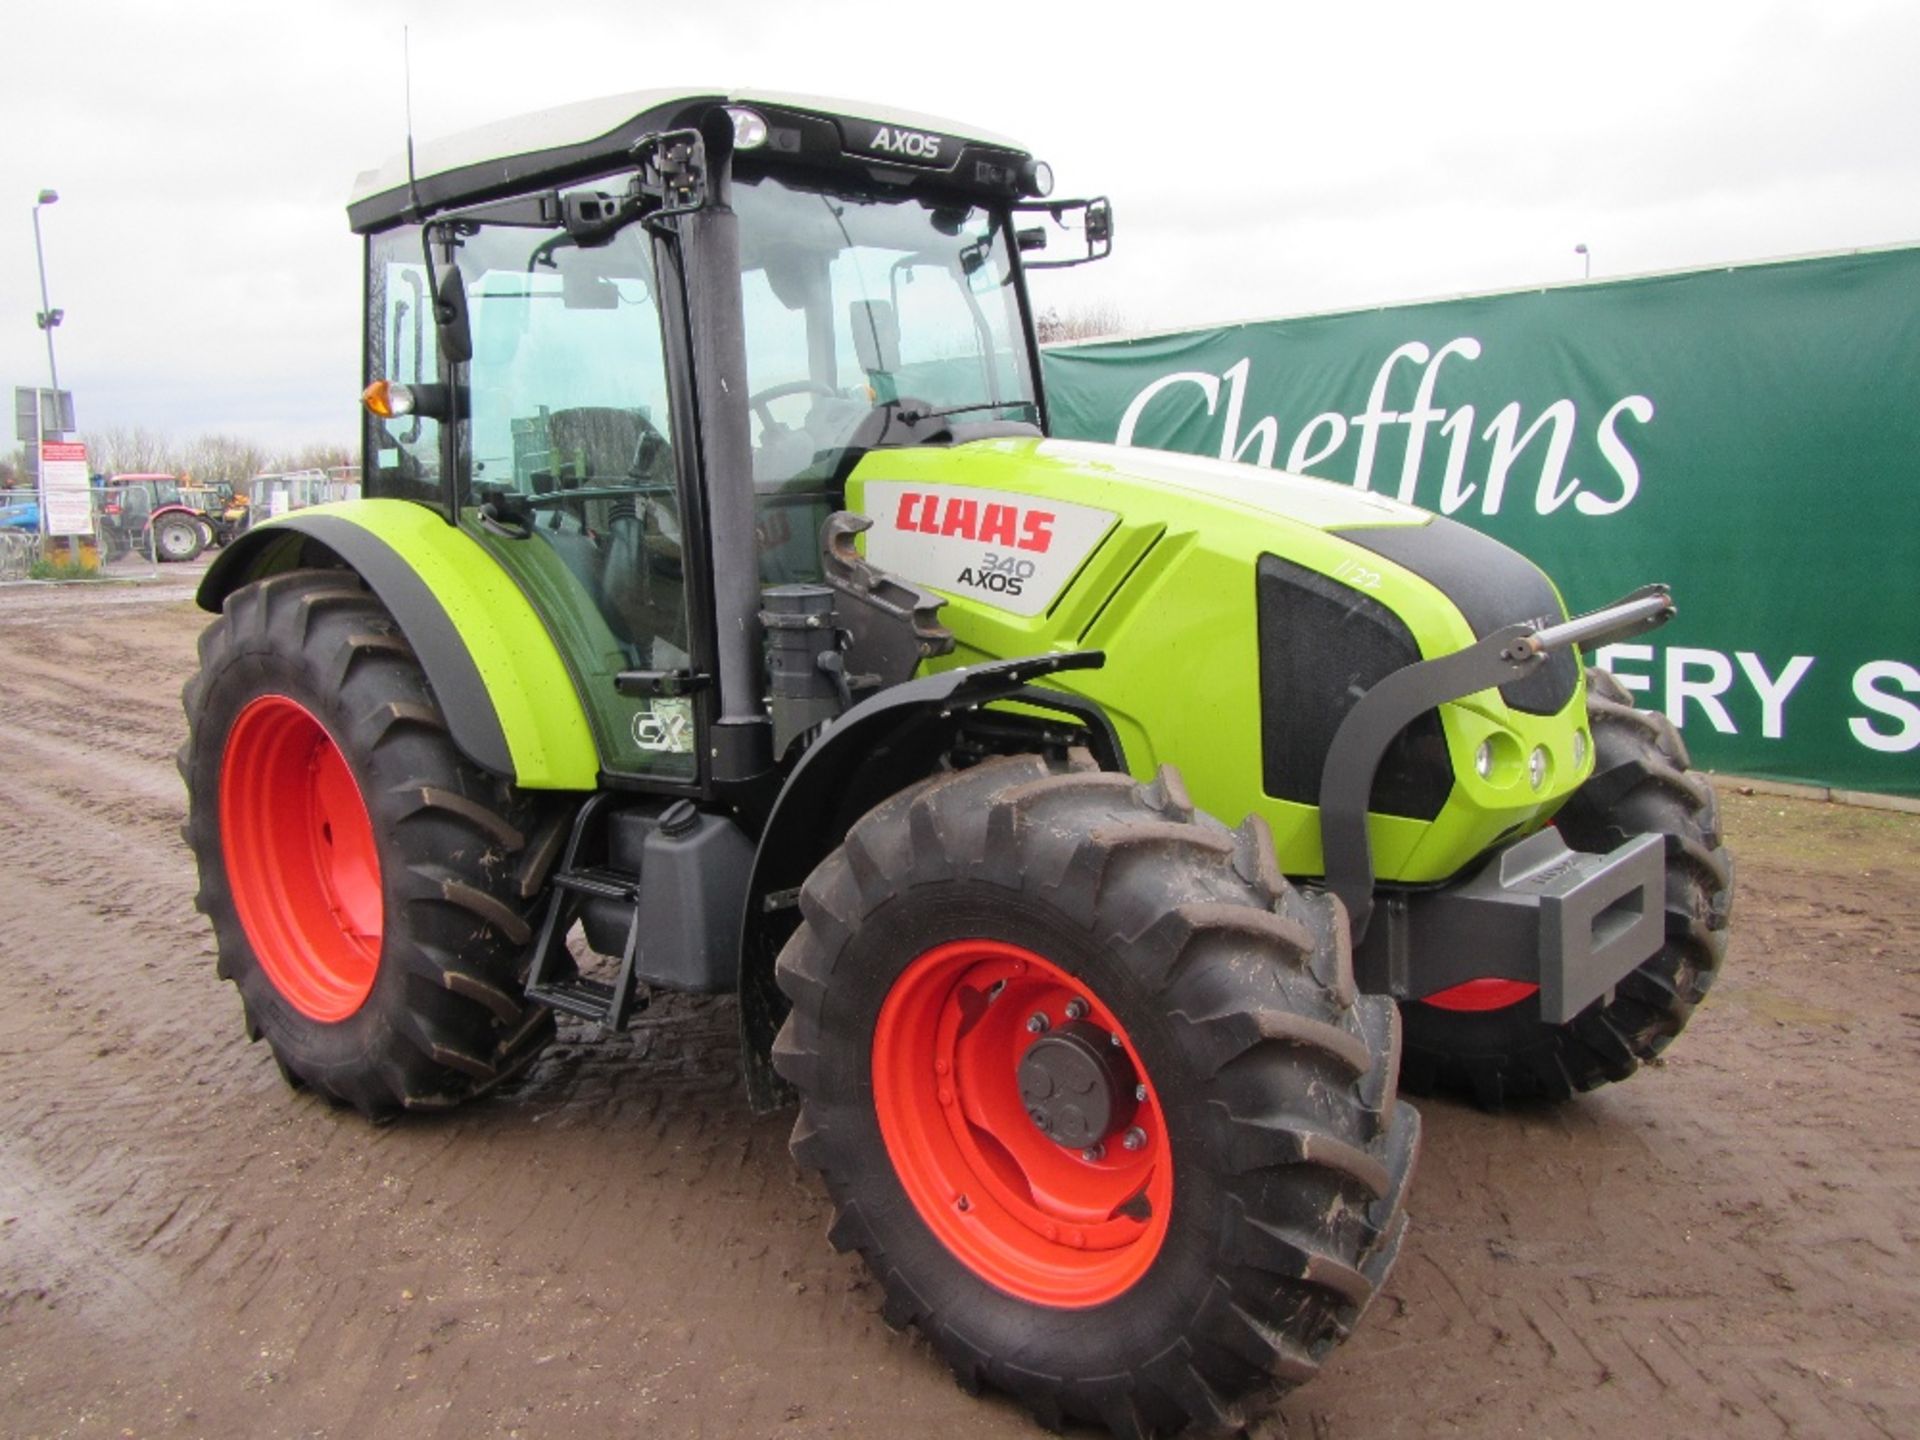 2014 Claas Axos 340C Tractor c/w Loader 500 Hrs Reg No GN64 CZF Ser No 2220597 - Image 3 of 17